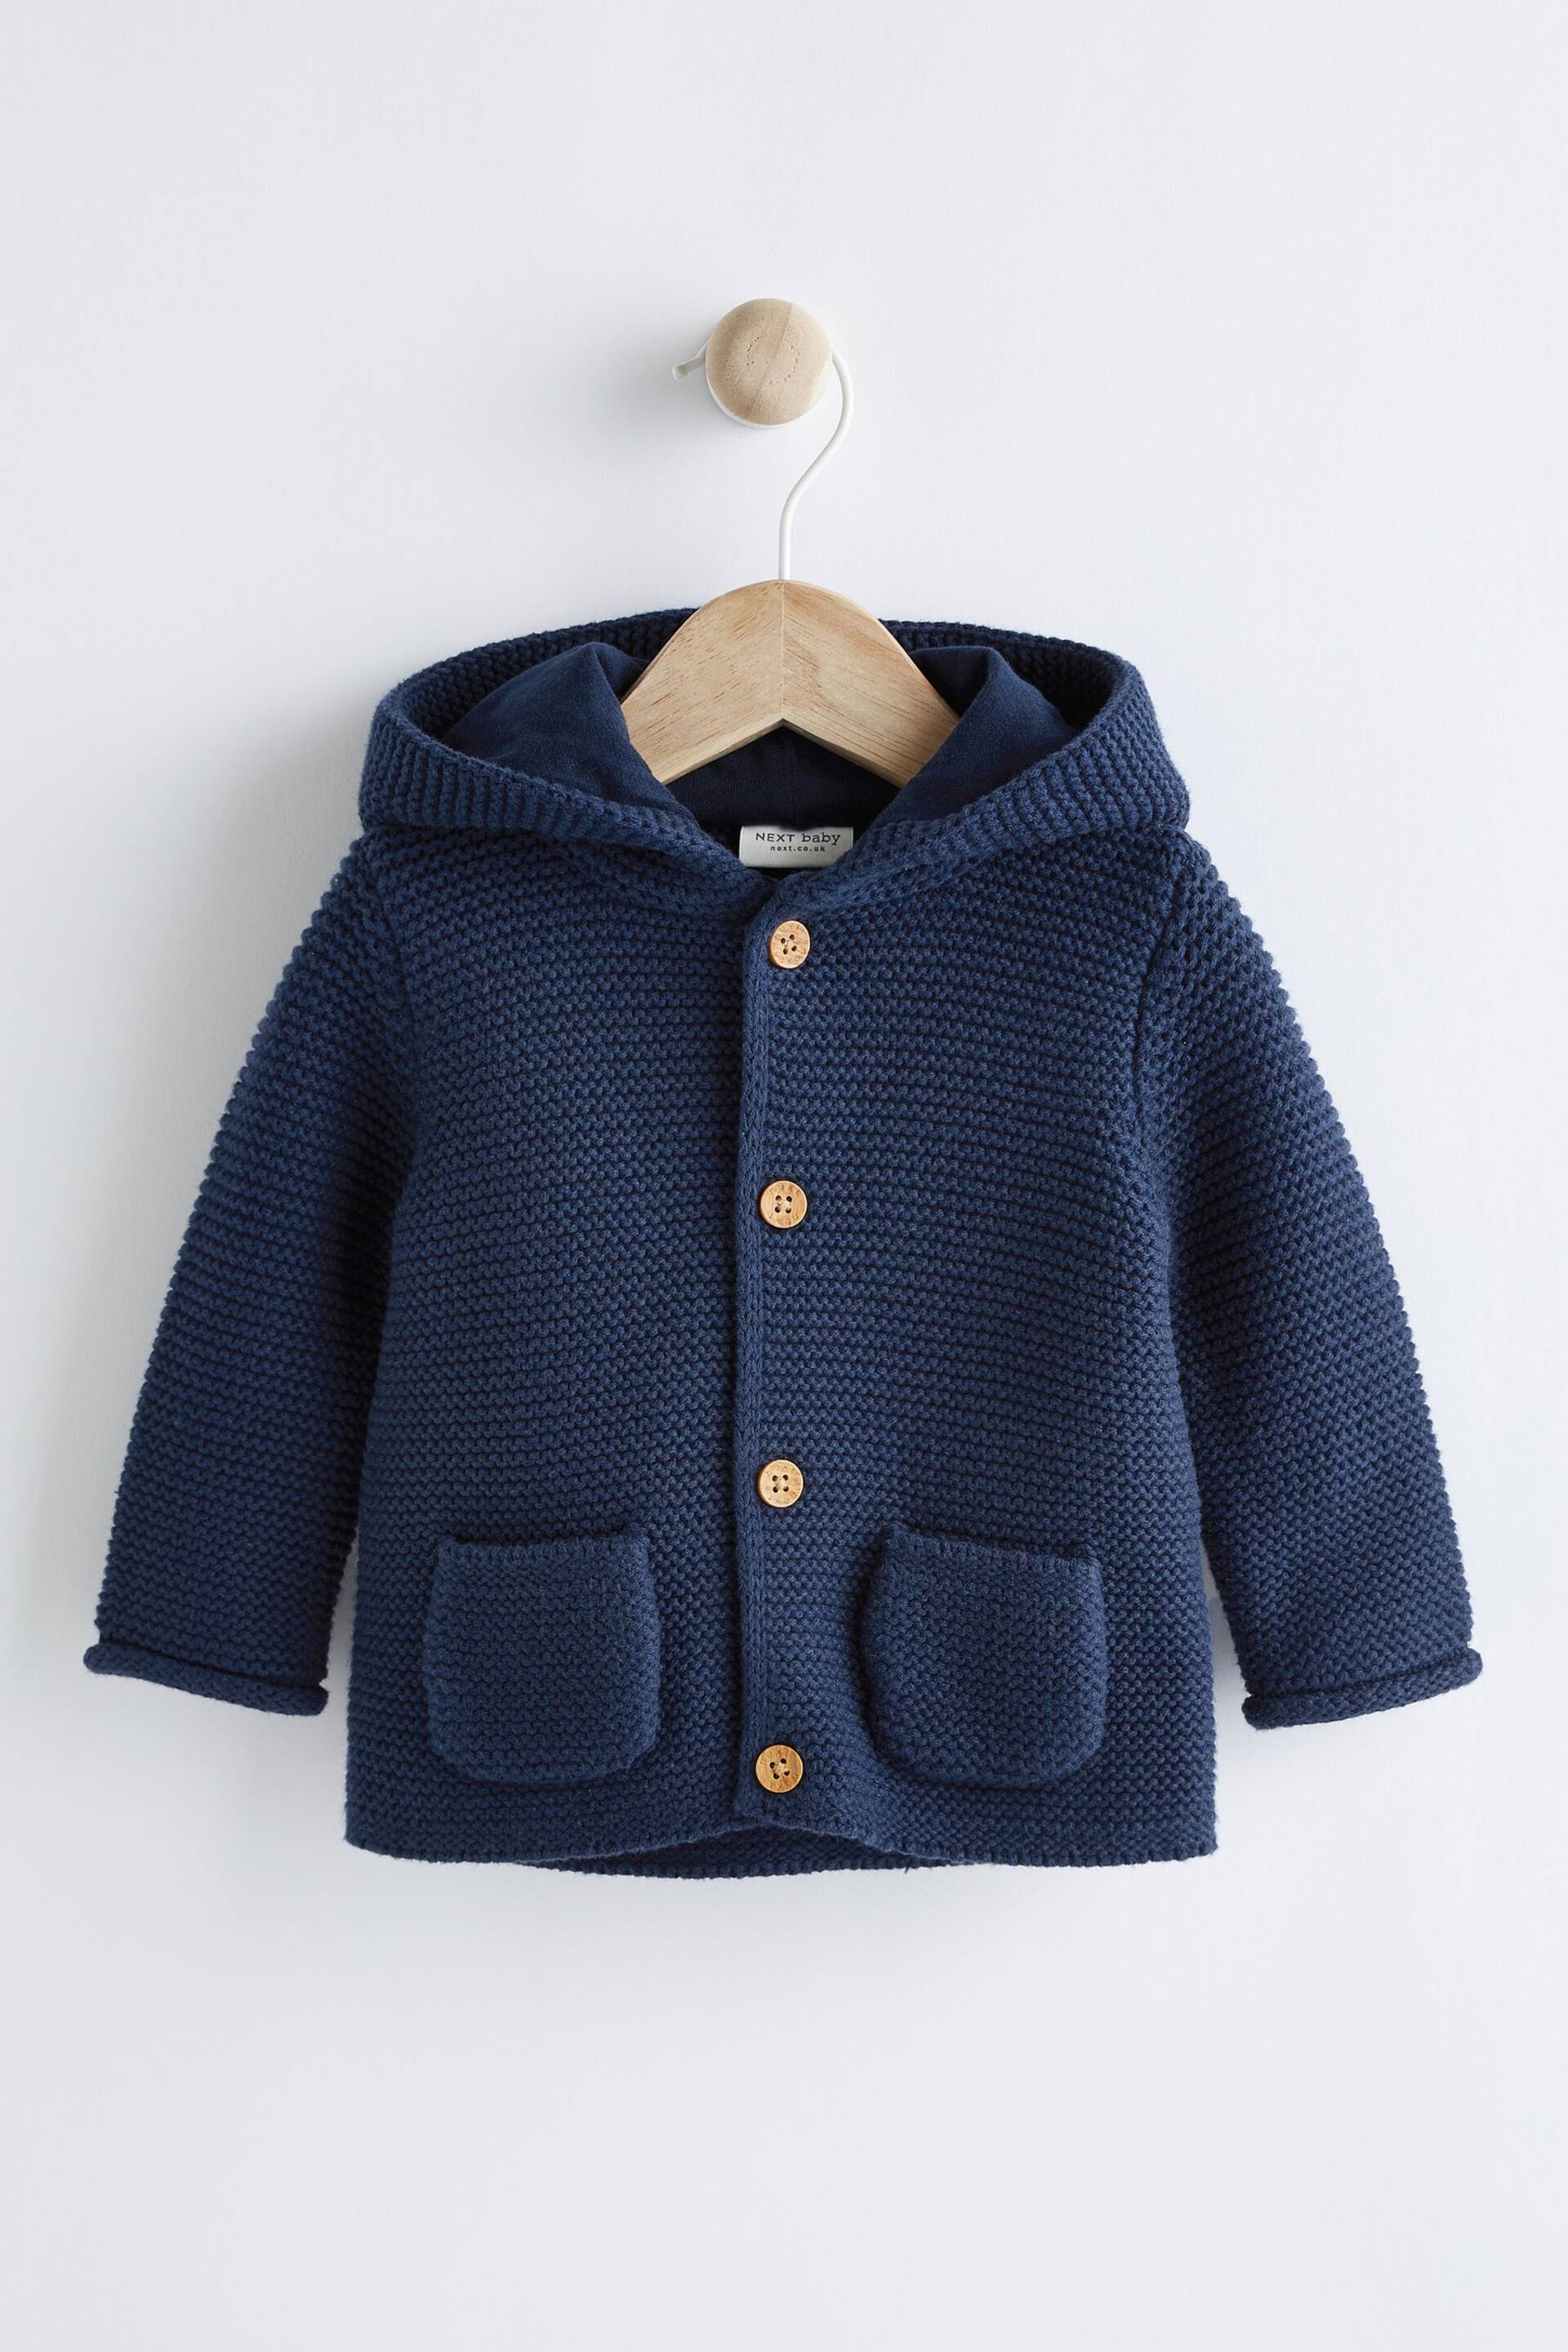 Blue Baby Knitted Cardigan (0mths-3yrs) - Image 1 of 5